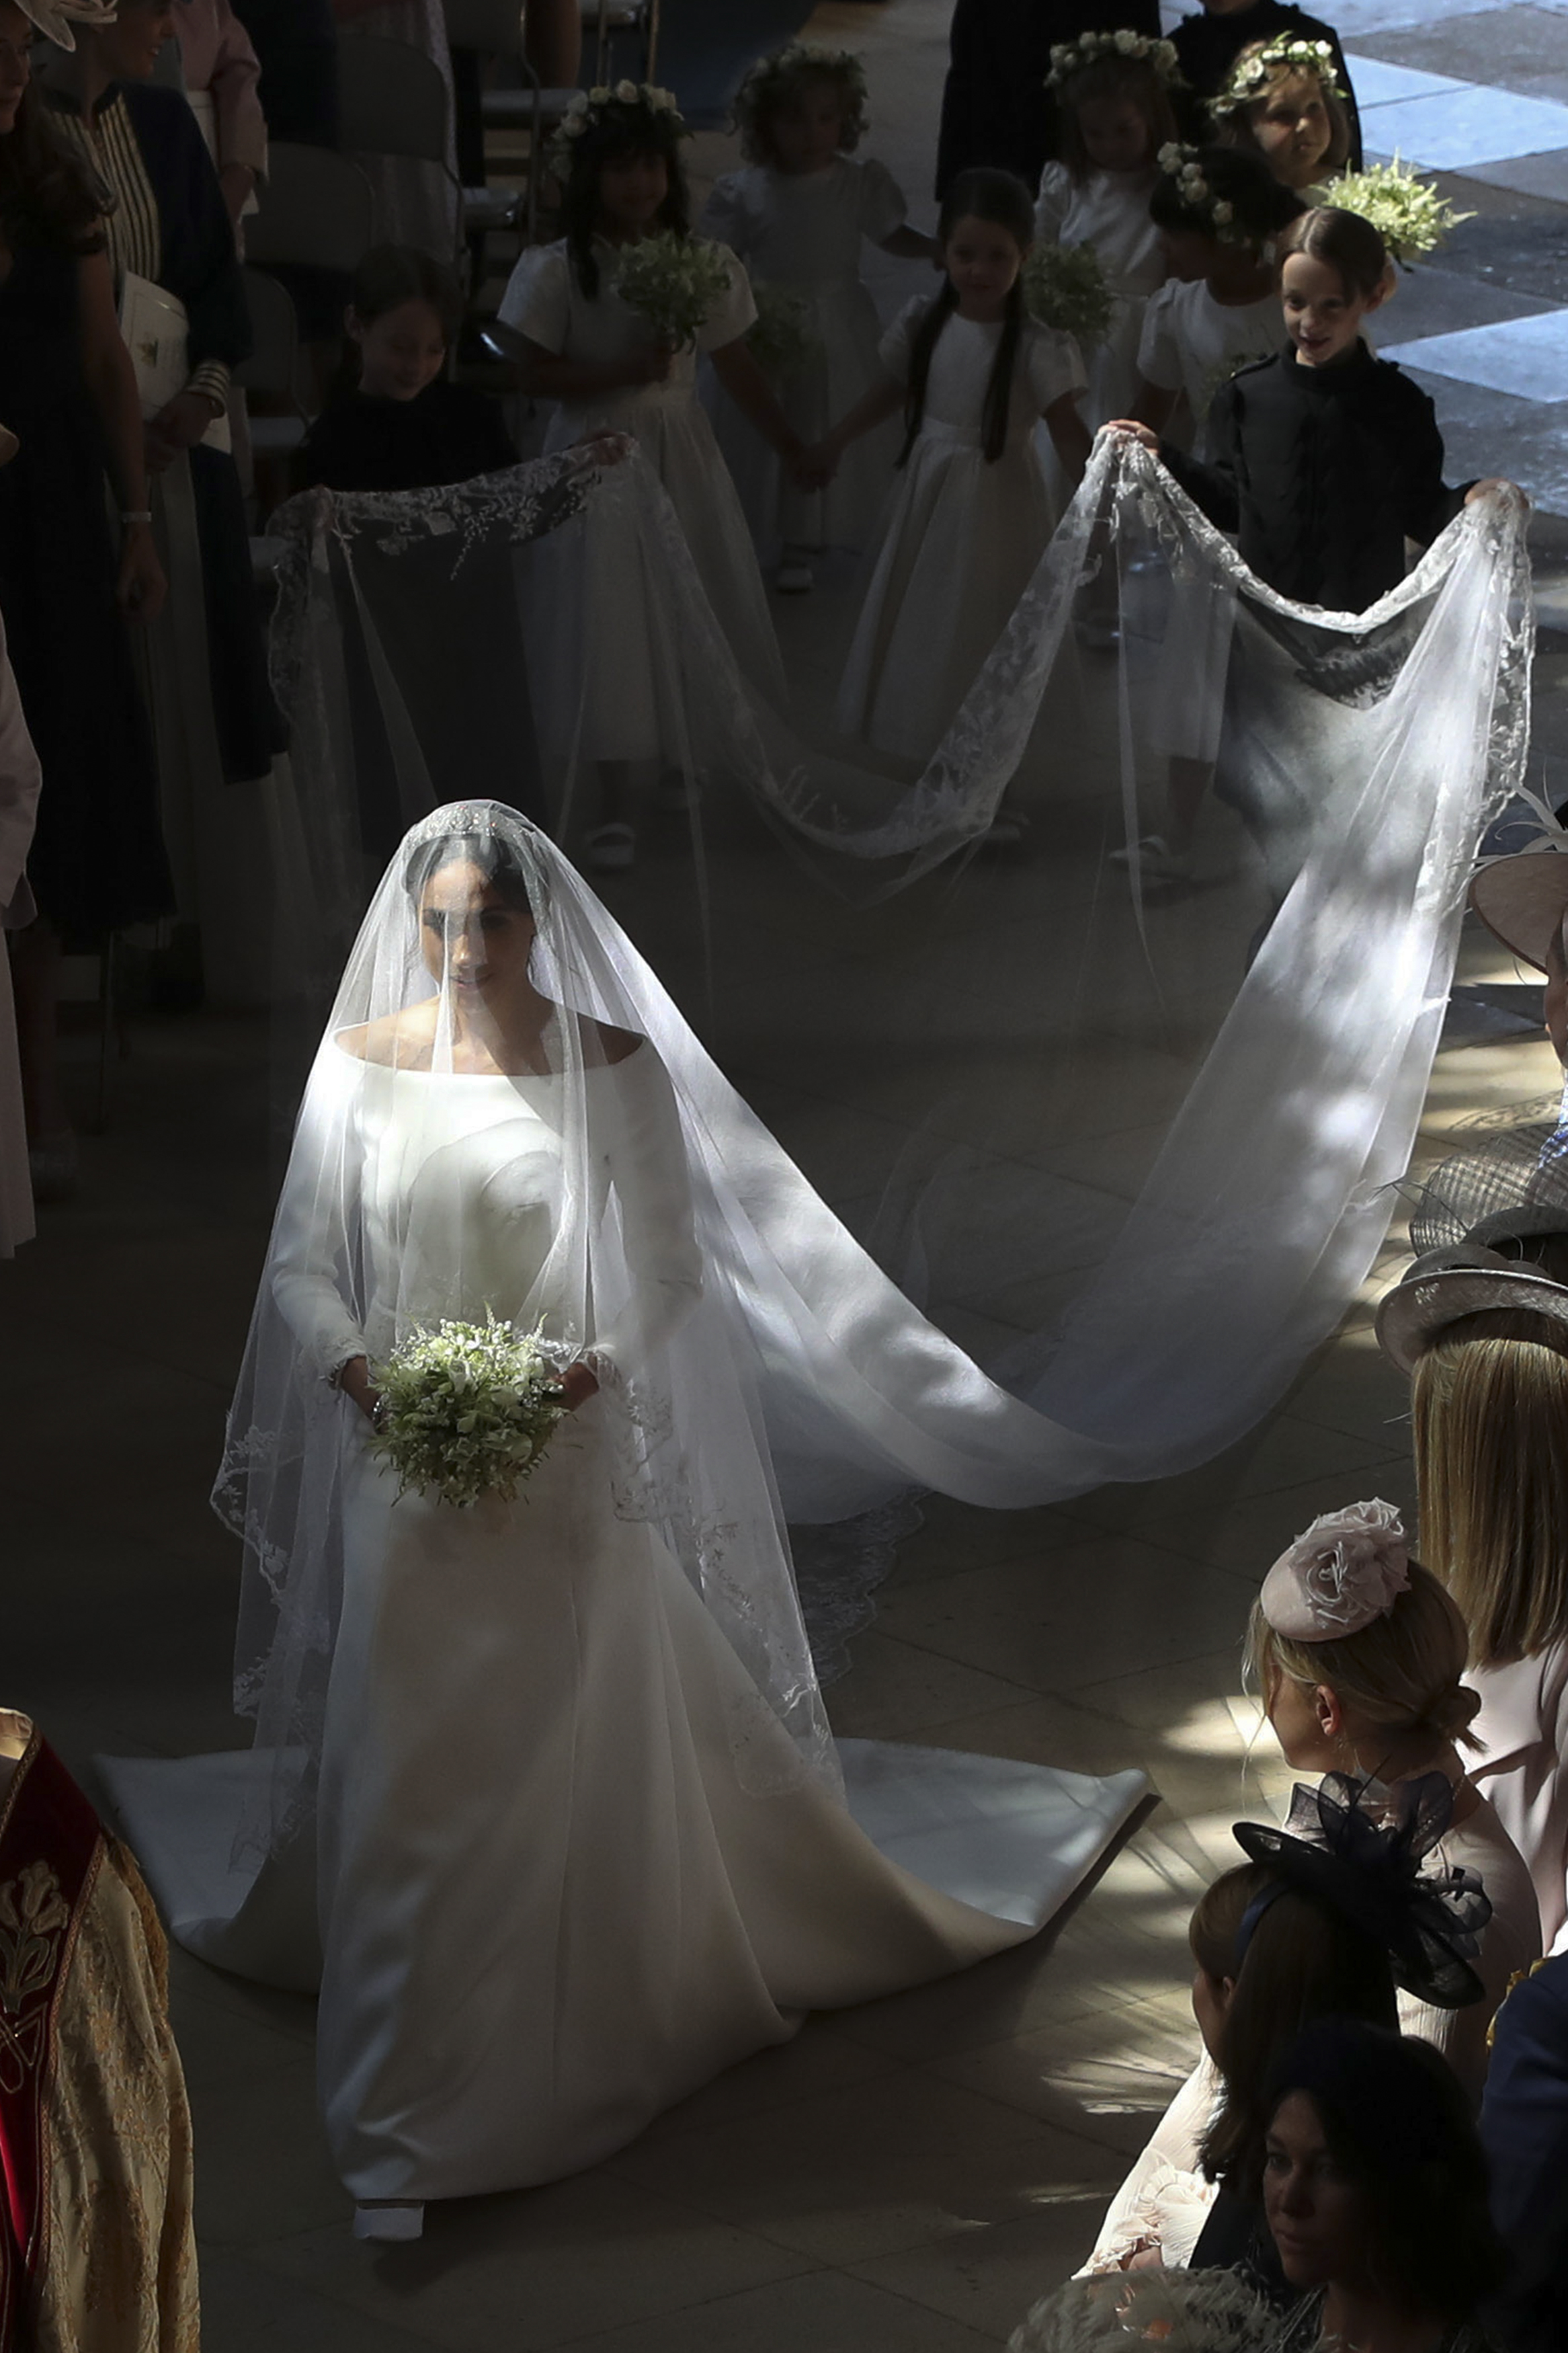 Meghan Markle walks down the aisle during her wedding to Prince Harry, Duke of Sussex in St George's Chapel, Windsor Castle, in Windsor, on May 19, 2018. | Source: Getty Images